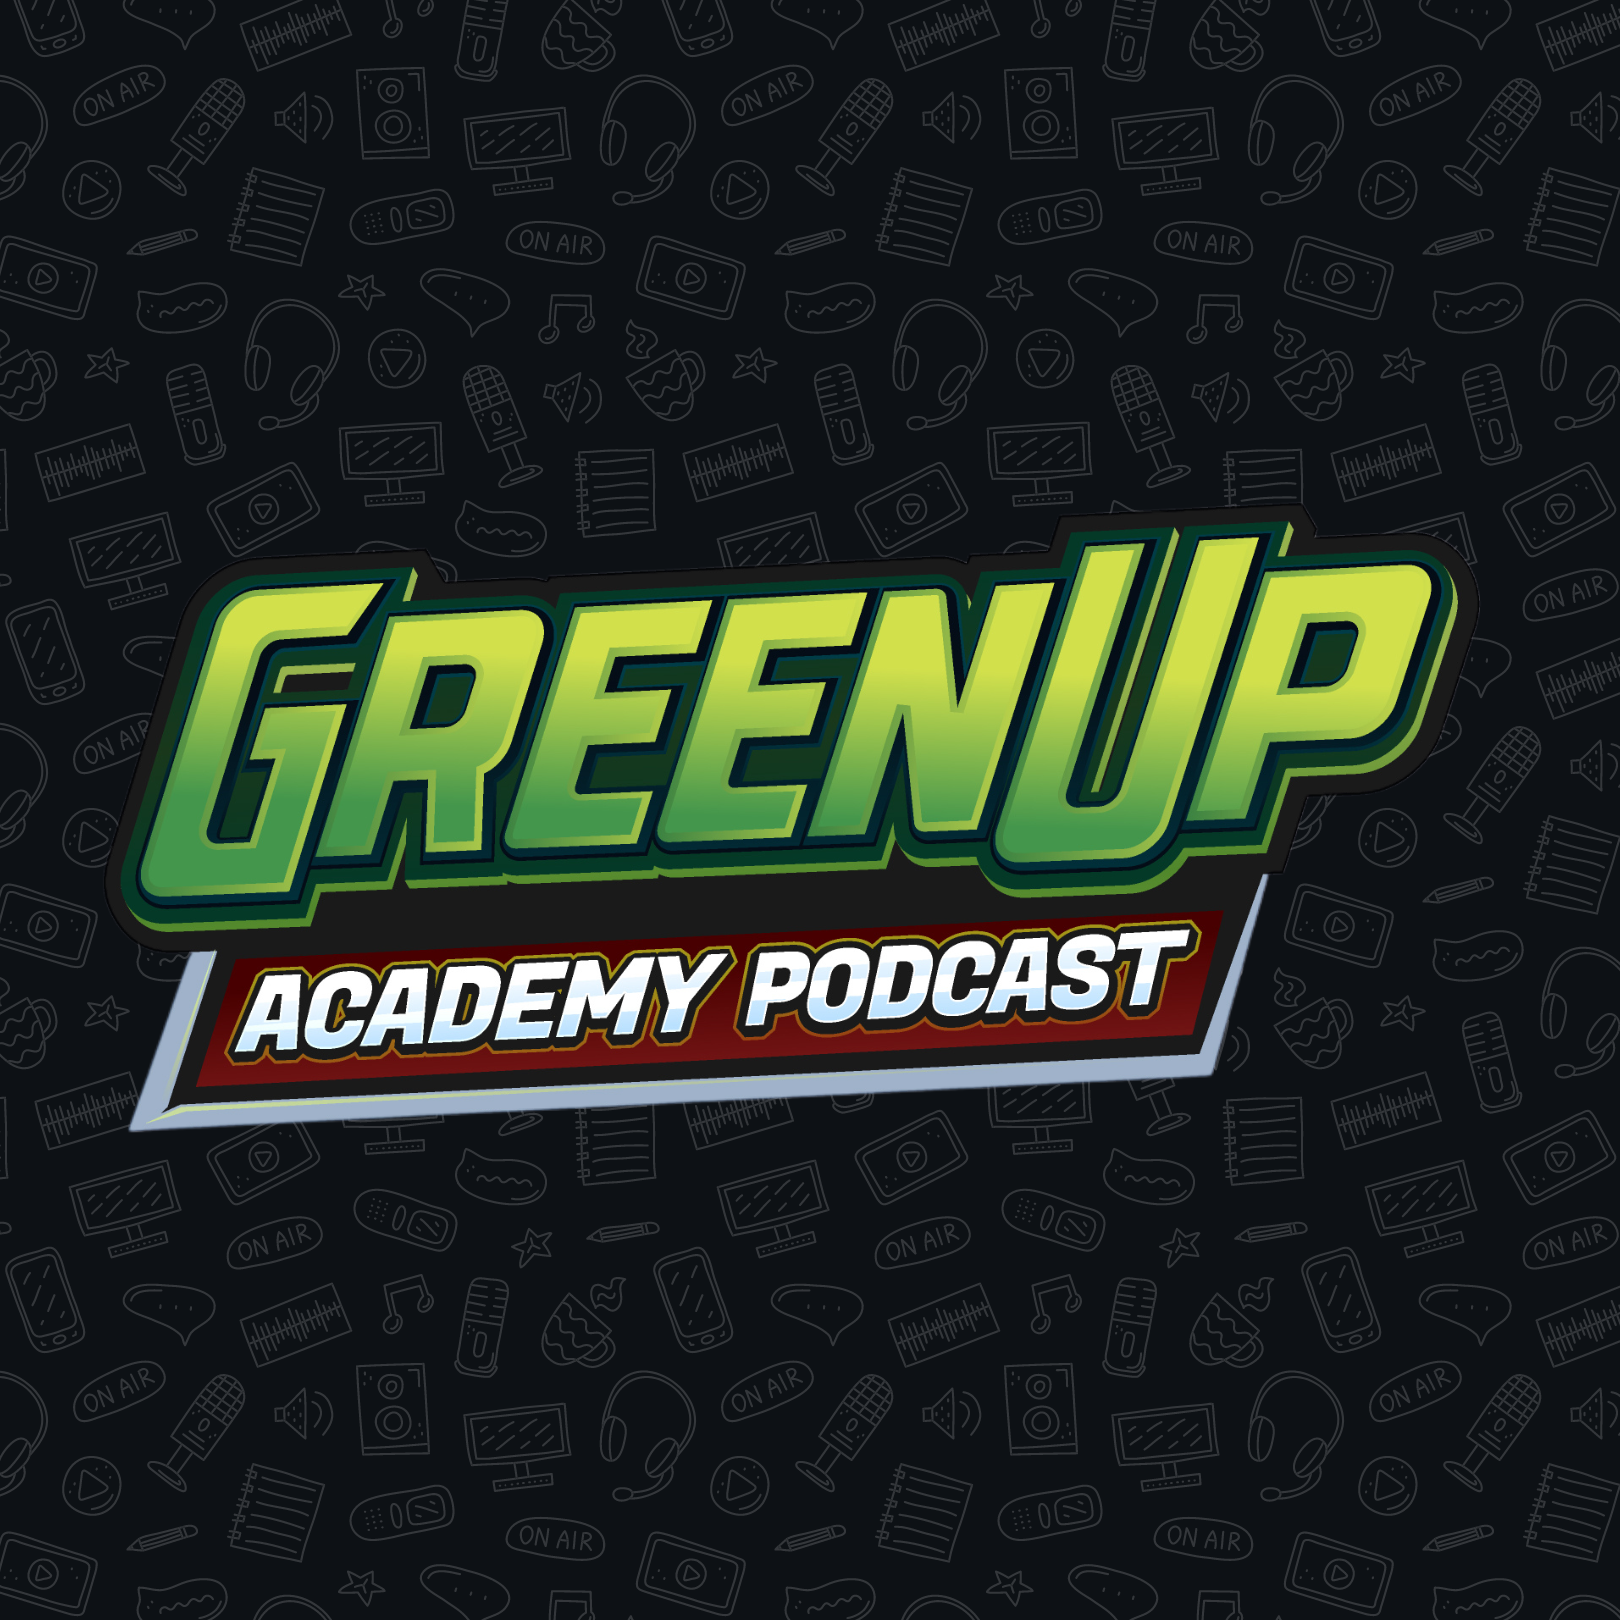 The GreenUp Academy Podcast